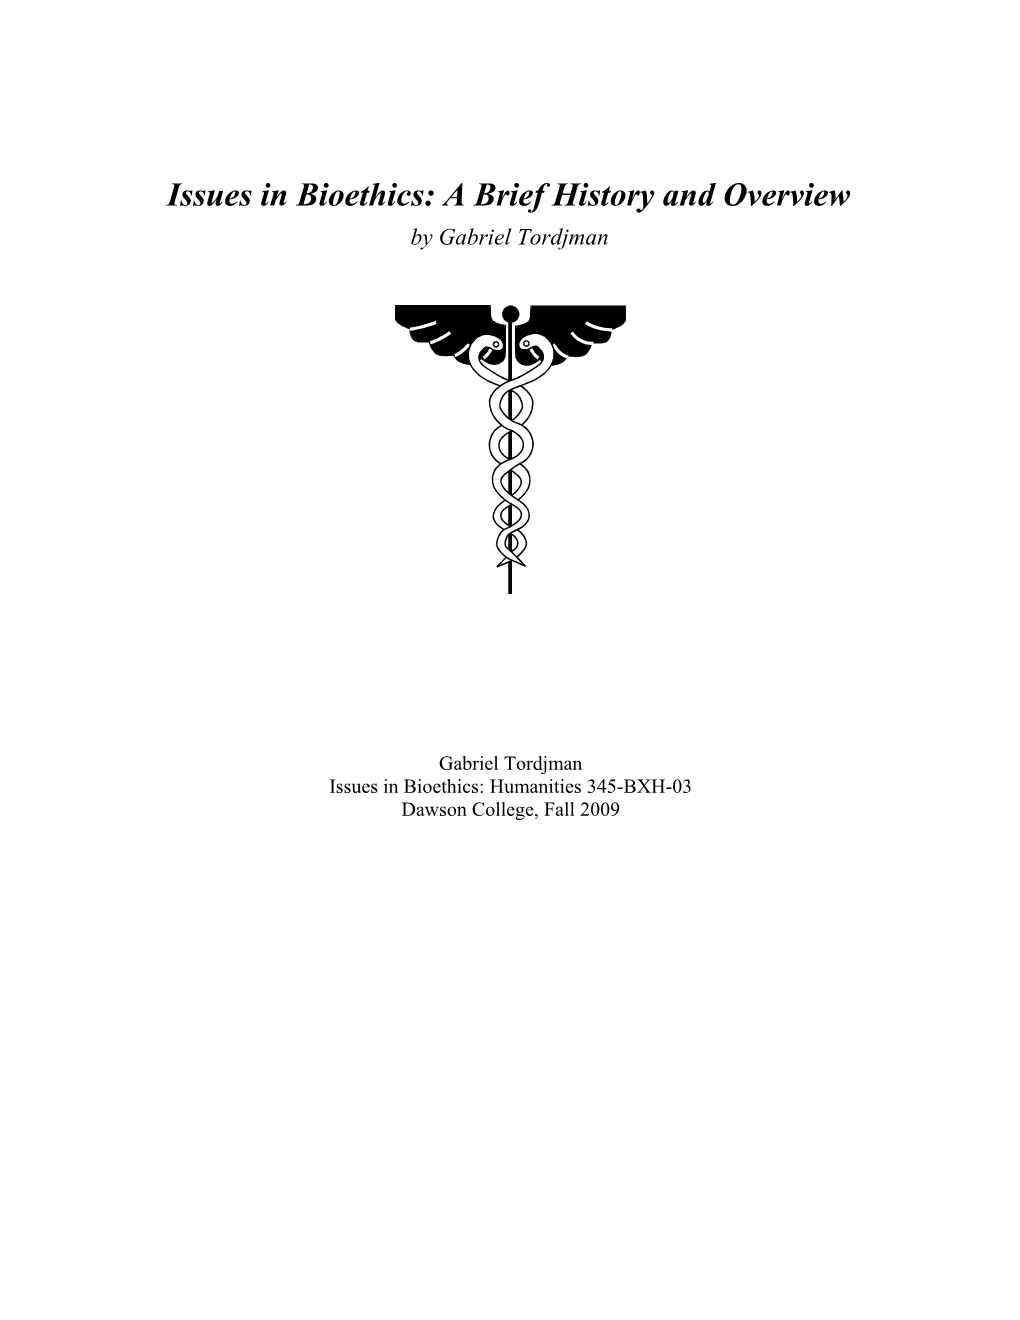 Issues in Bioethics: a Brief History and Overview